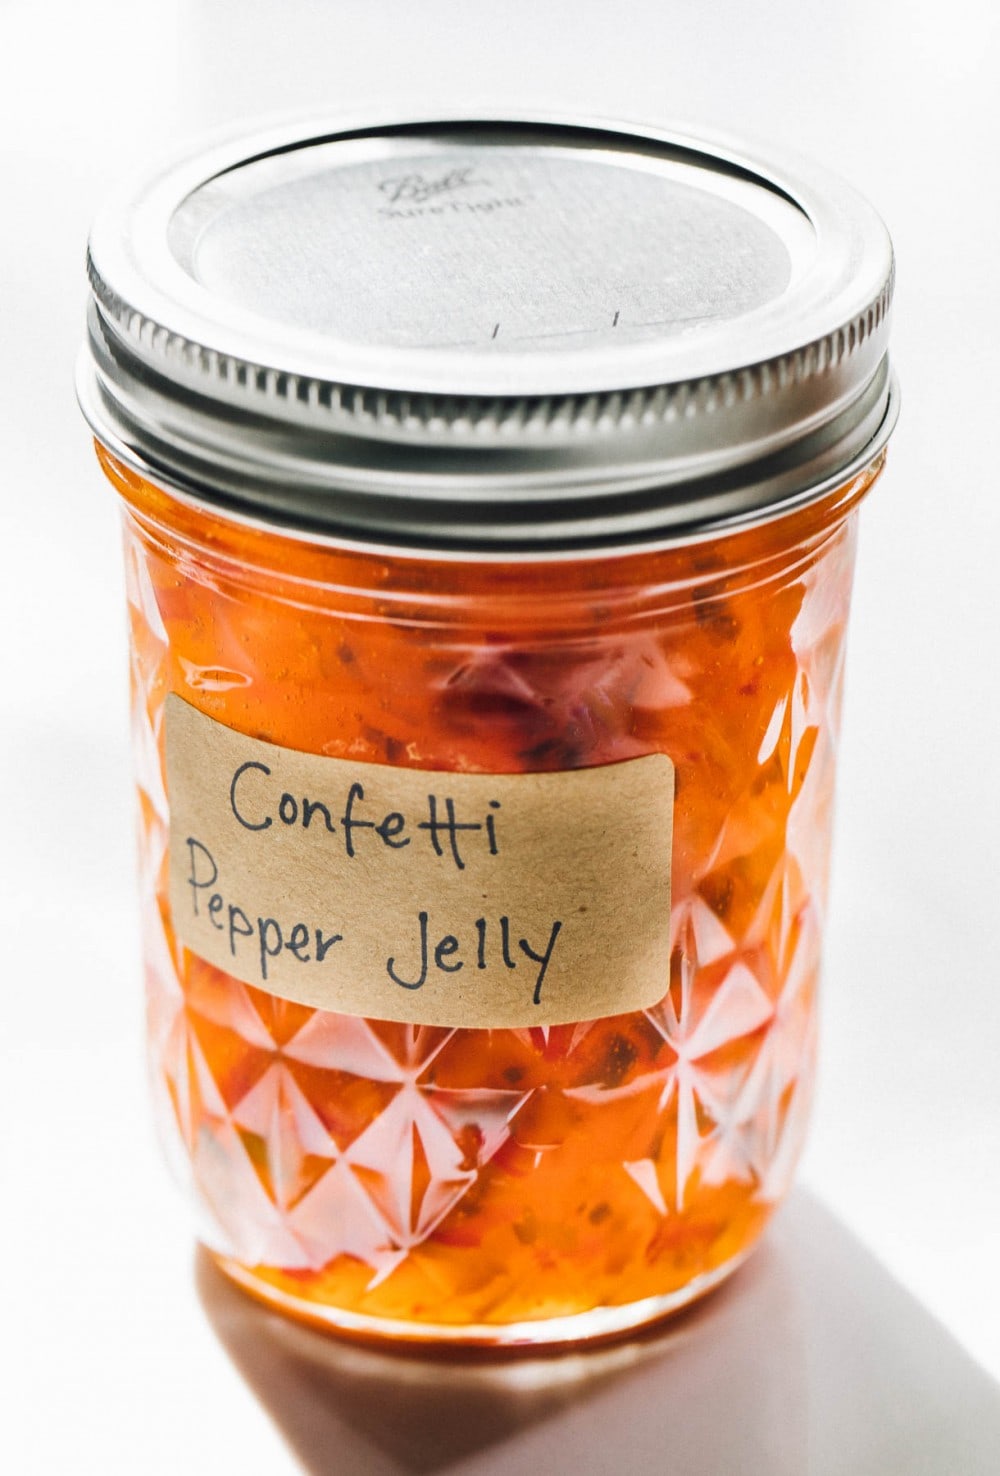 confetti pepper jelly in a clear canning jar